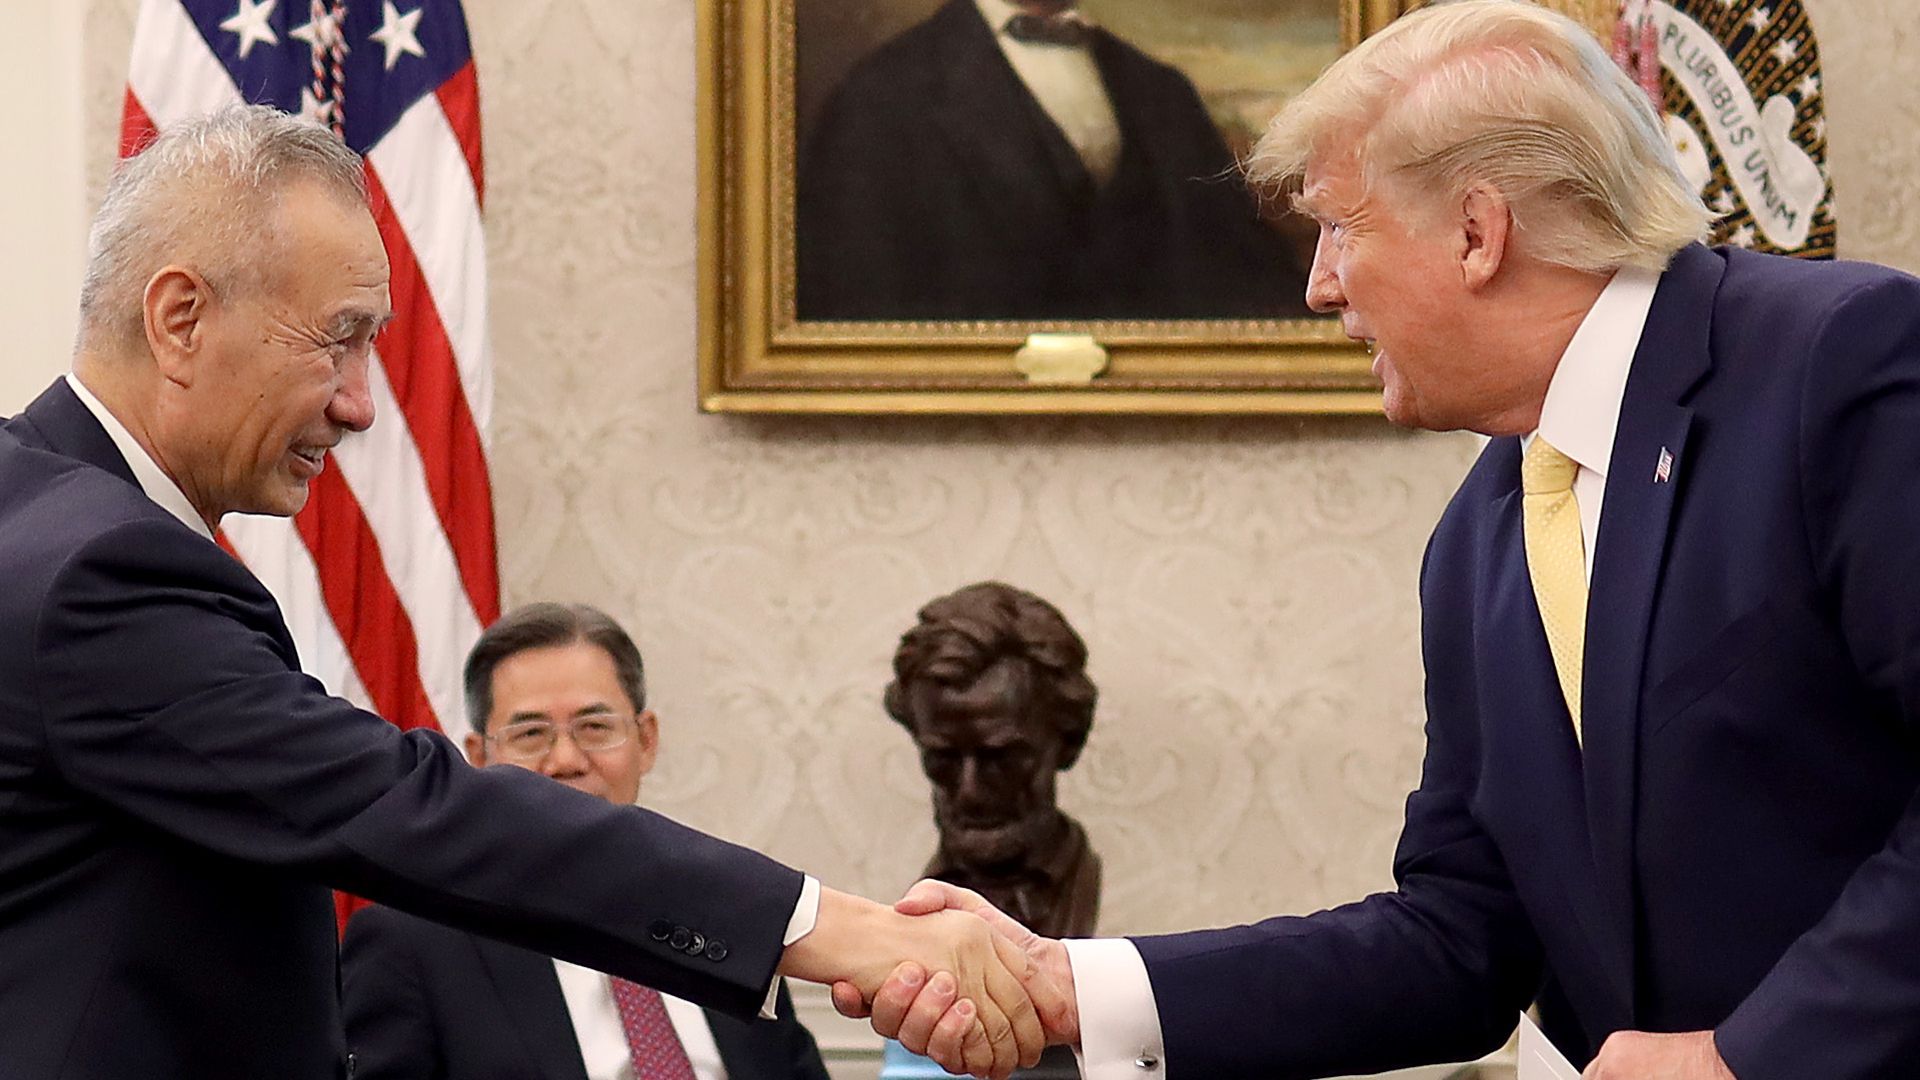 President Trump shakes hands with Chinese Vice Premier Liu He.